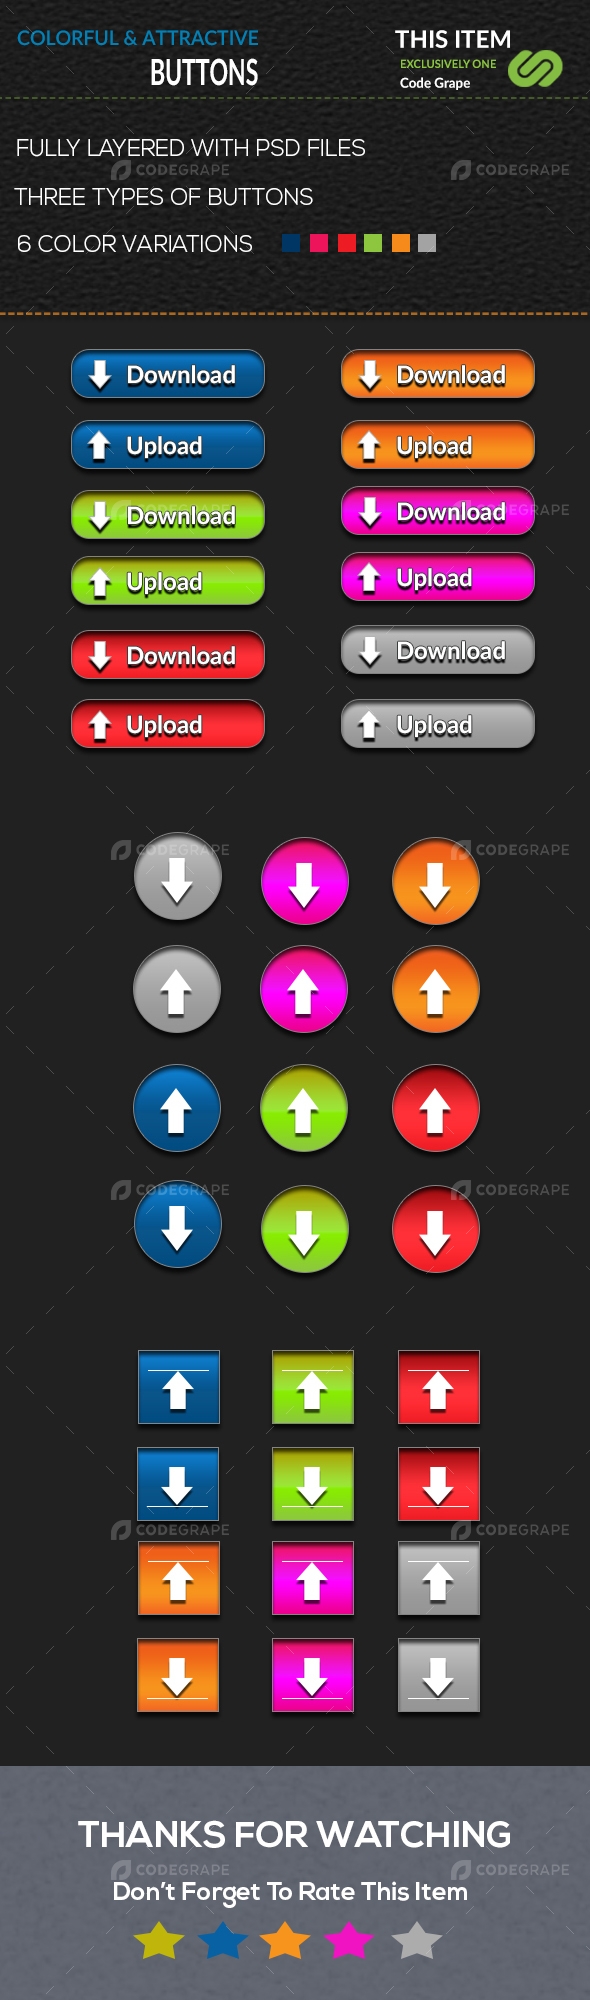 Colorful Upload & Download Buttons Collection